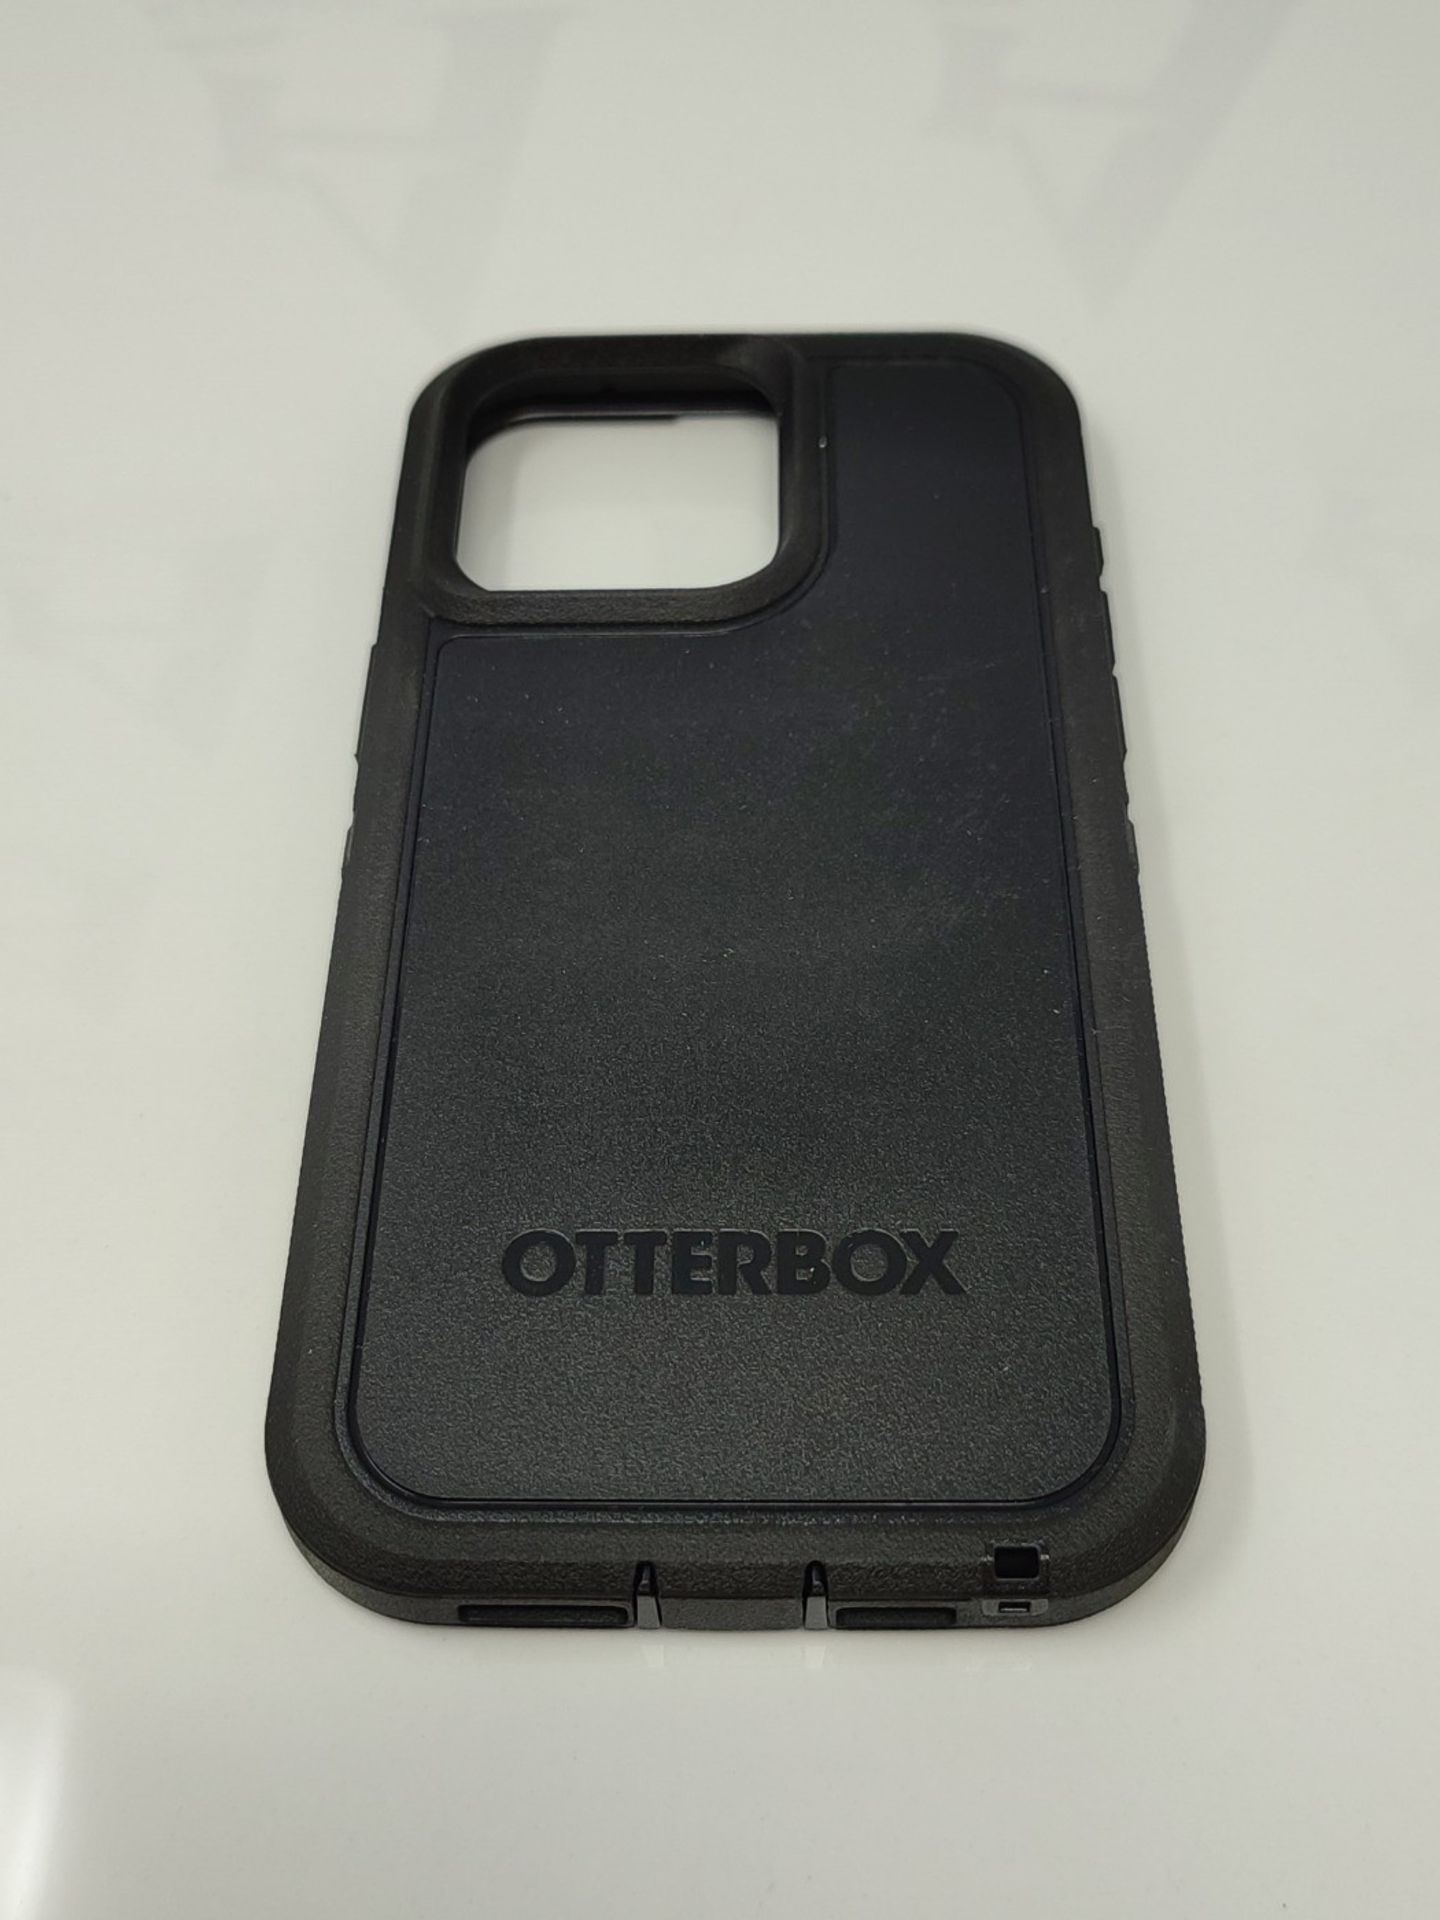 OtterBox Defender XT Case for iPhone 15 Pro Max with MagSafe, Shockproof, Drop proof, - Image 2 of 3